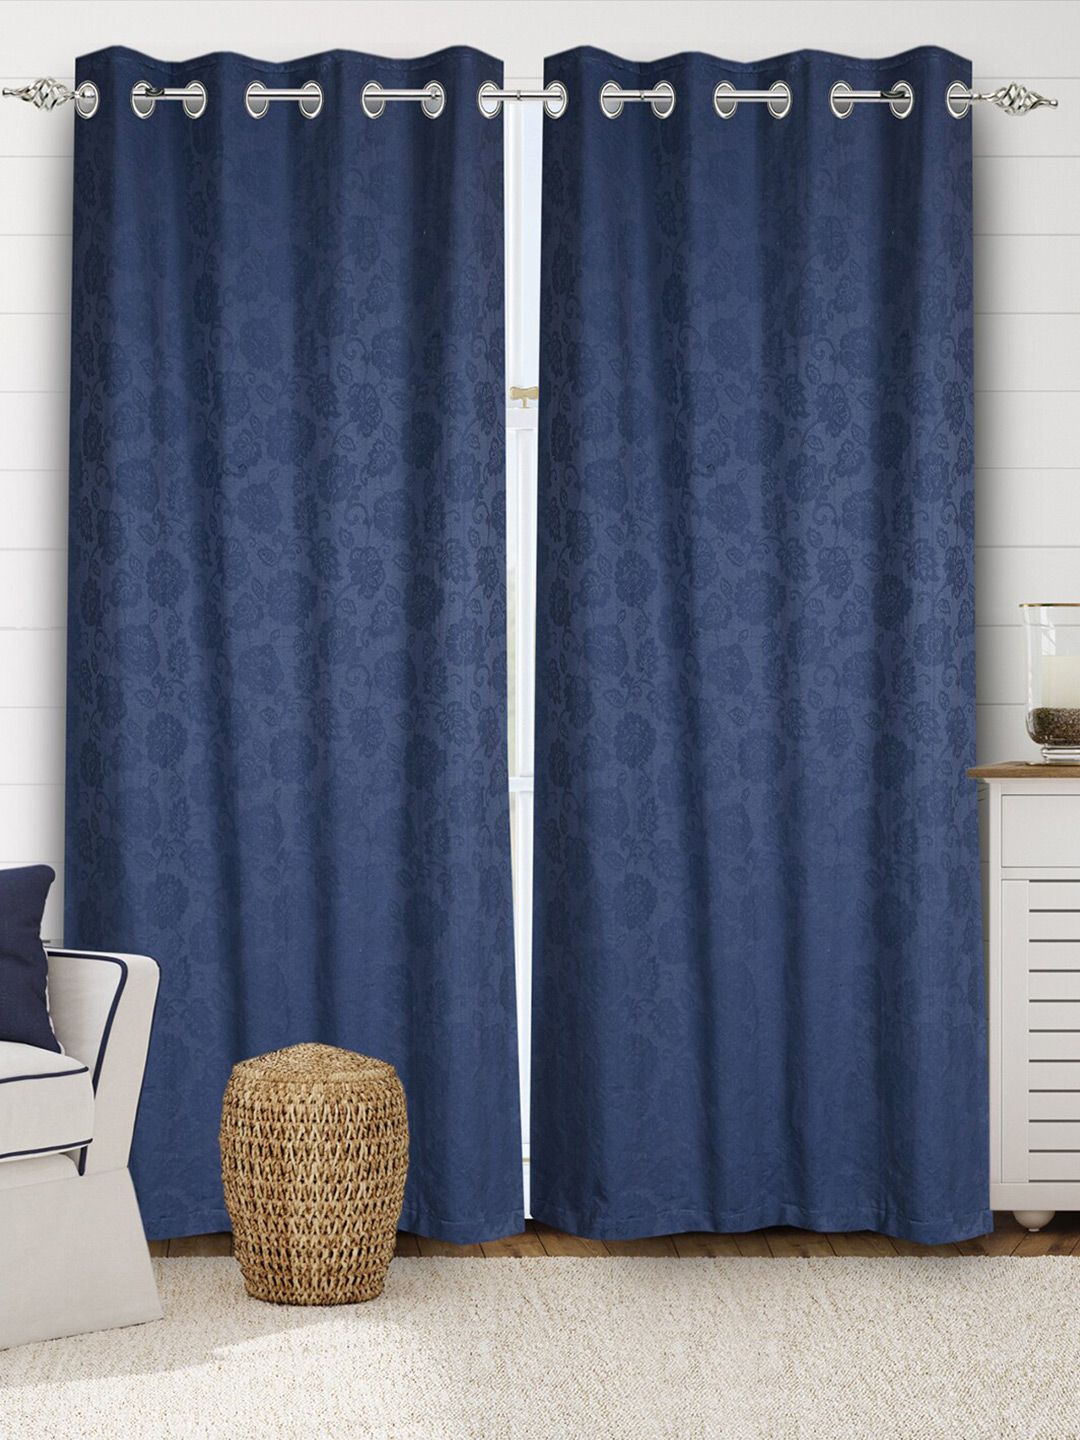 Saral Home Blue Set of 2 Black Out Door Curtain Price in India